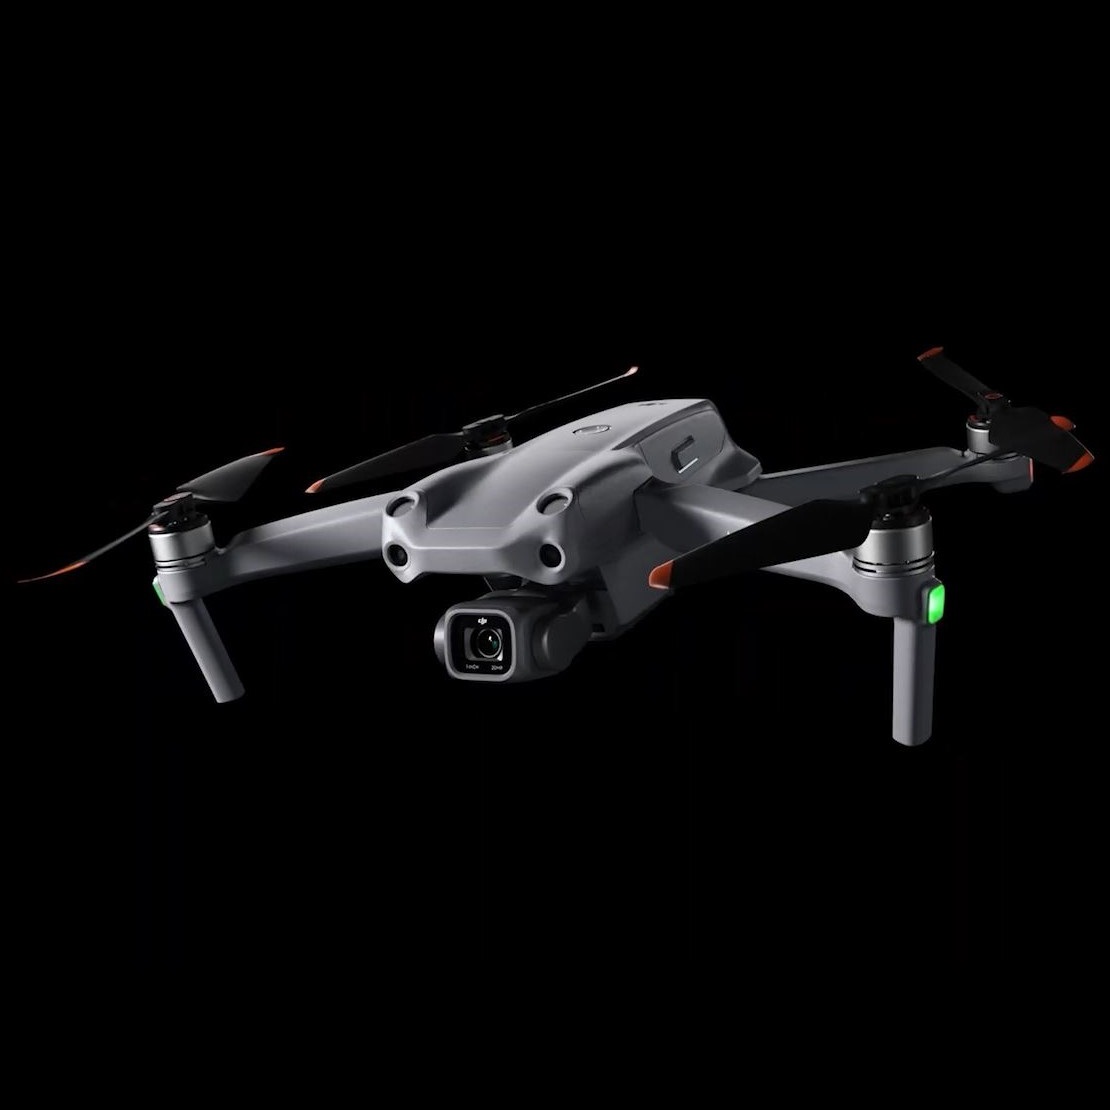 DJI Air 2S features a 1-inch CMOS sensor with 2.4μm-sized pixels. With exceptional exposure sensitivity and dynamic range, it can capture up to 12.6 stops in 10 seconds.